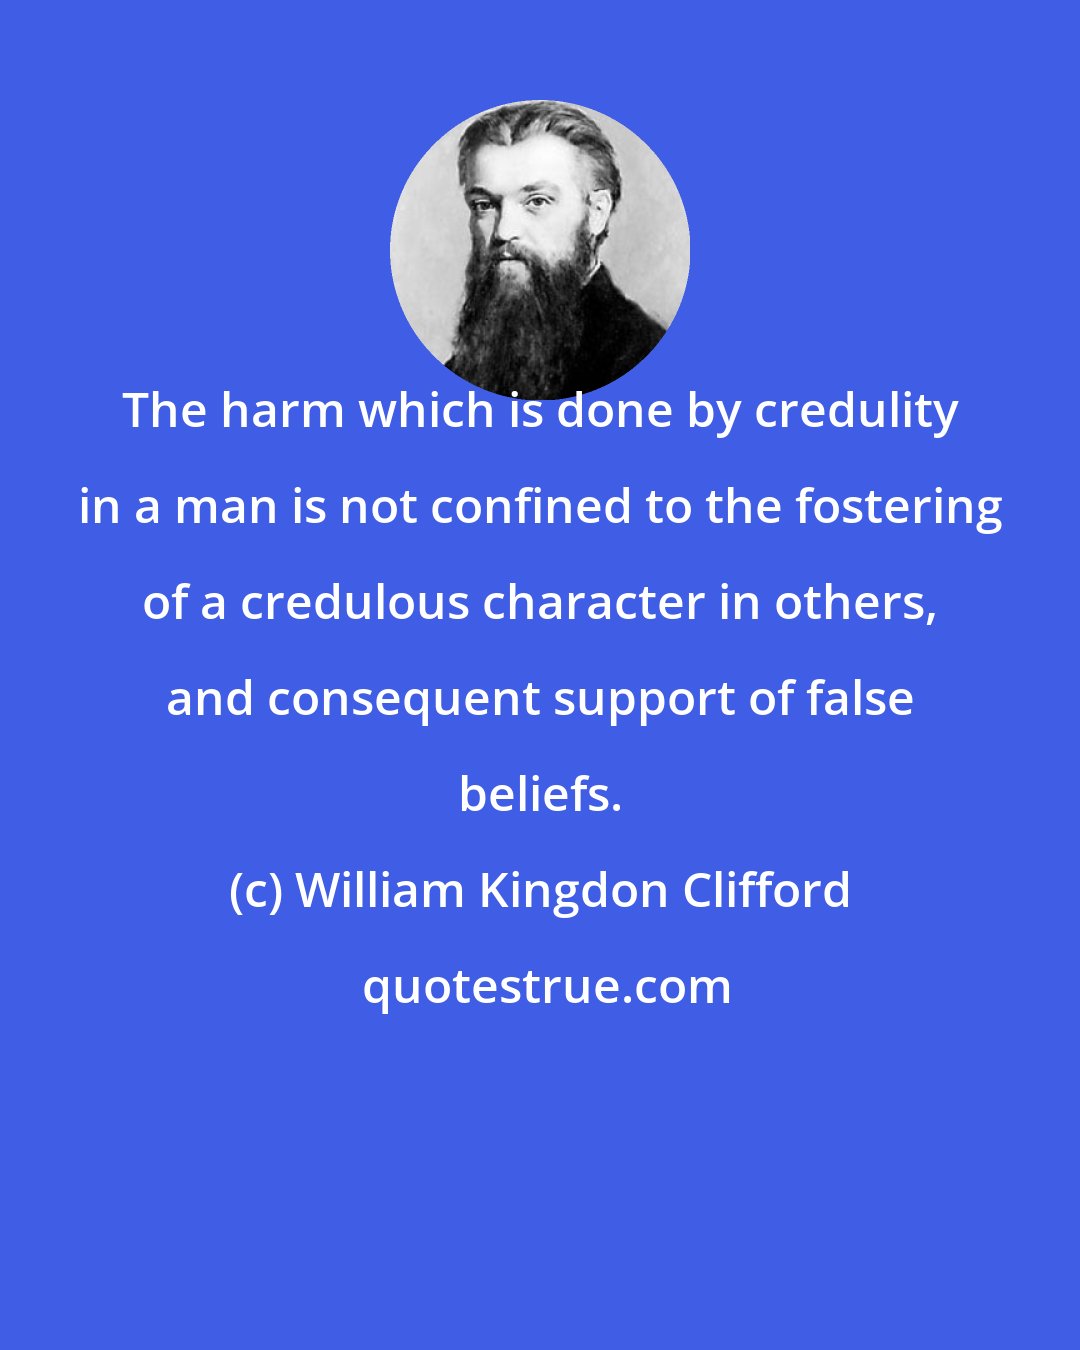 William Kingdon Clifford: The harm which is done by credulity in a man is not confined to the fostering of a credulous character in others, and consequent support of false beliefs.